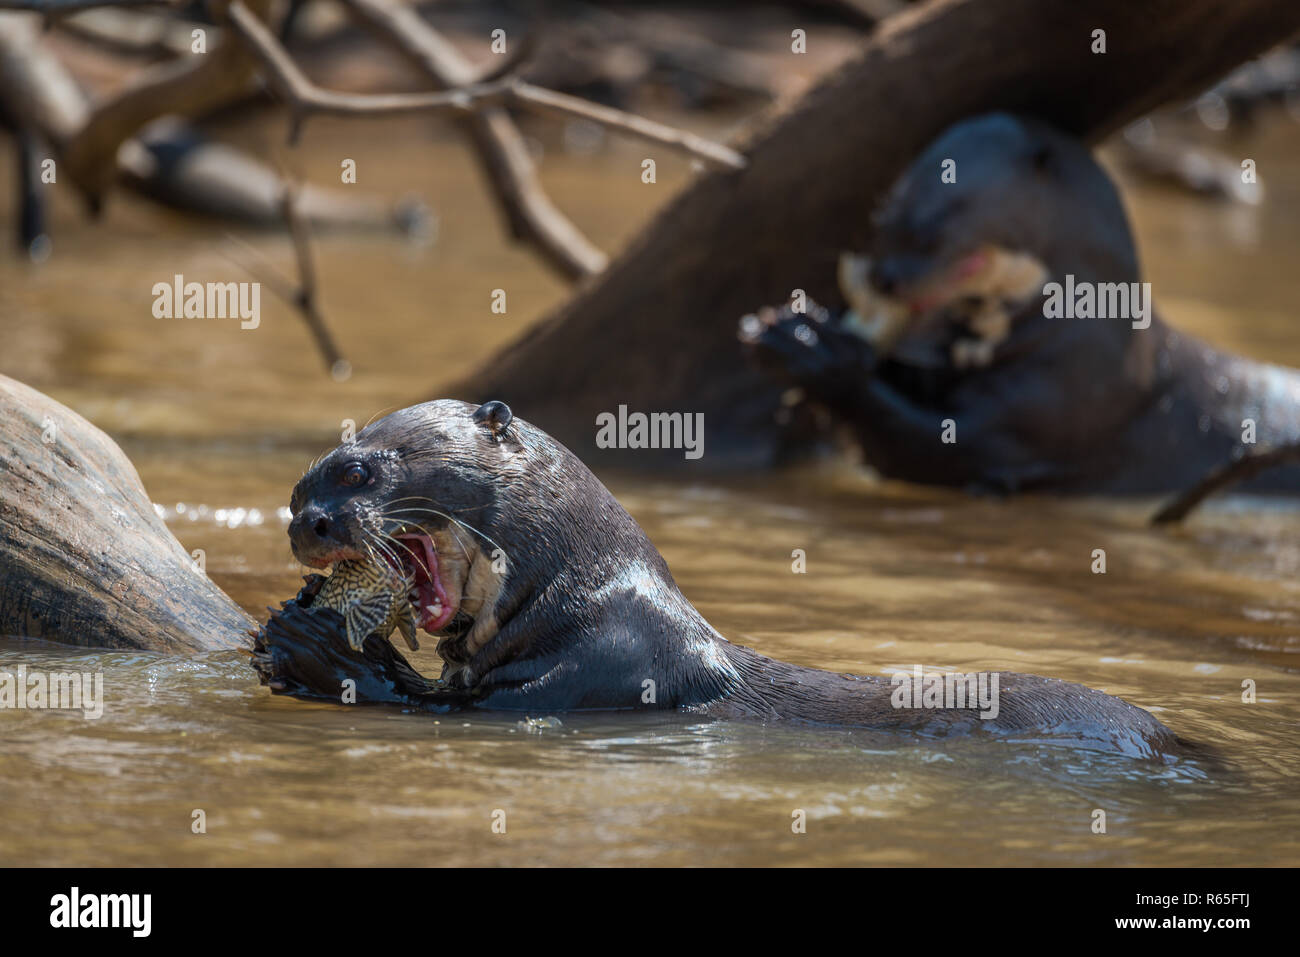 Giant river otters eating fish in river Stock Photo - Alamy